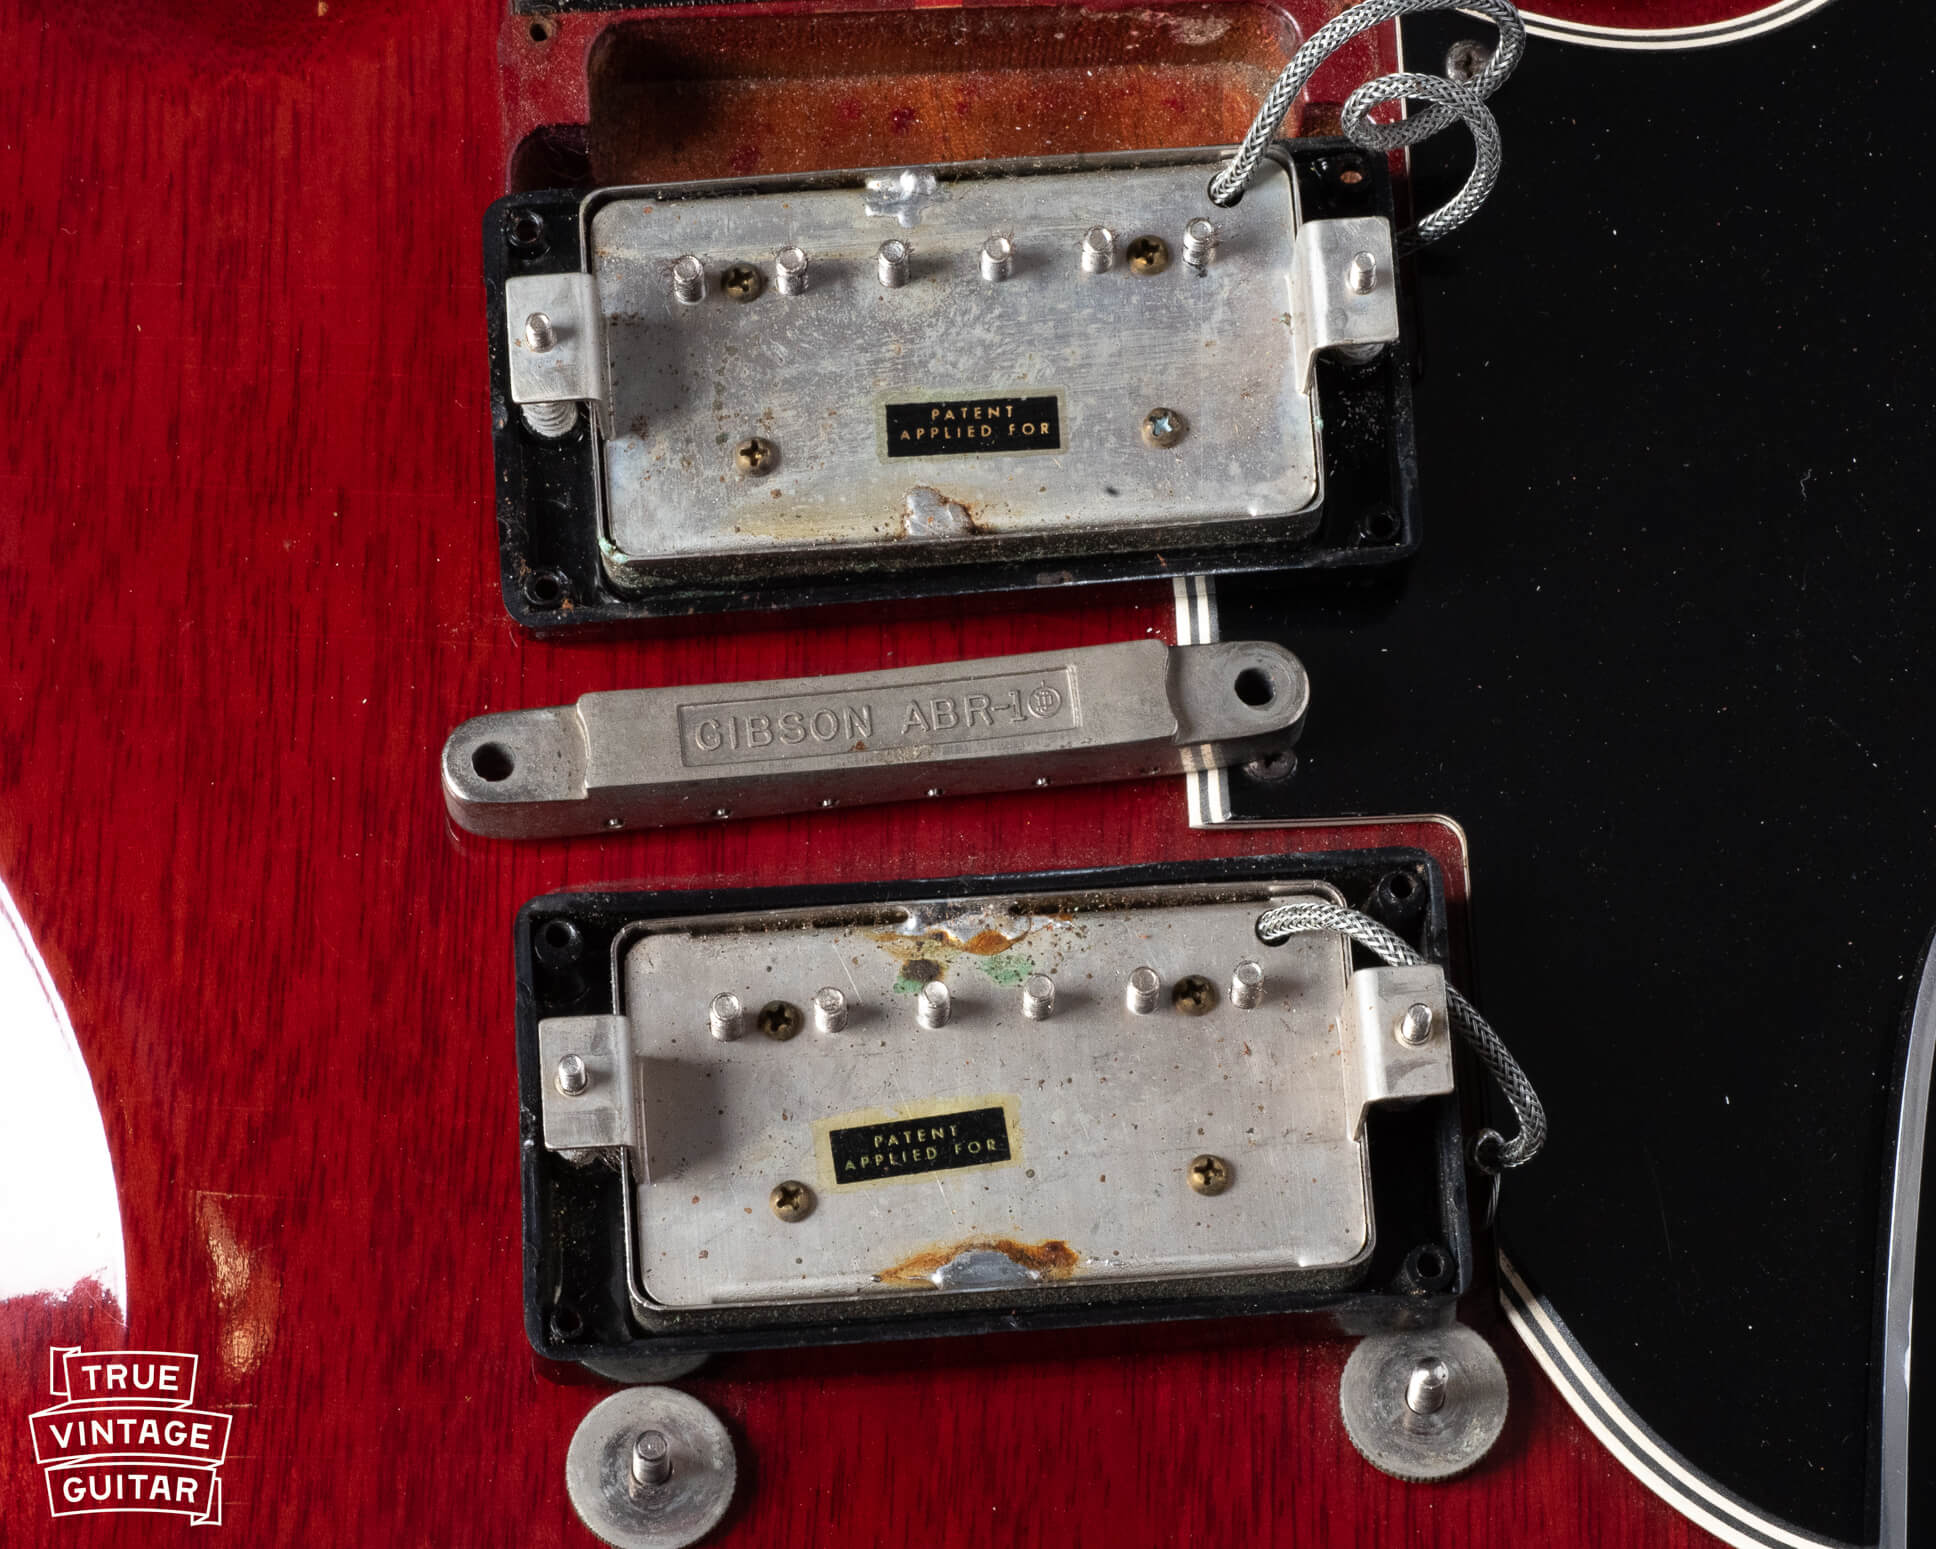 Gibson PAF Patent Applied For humbucking pickup resistance readings